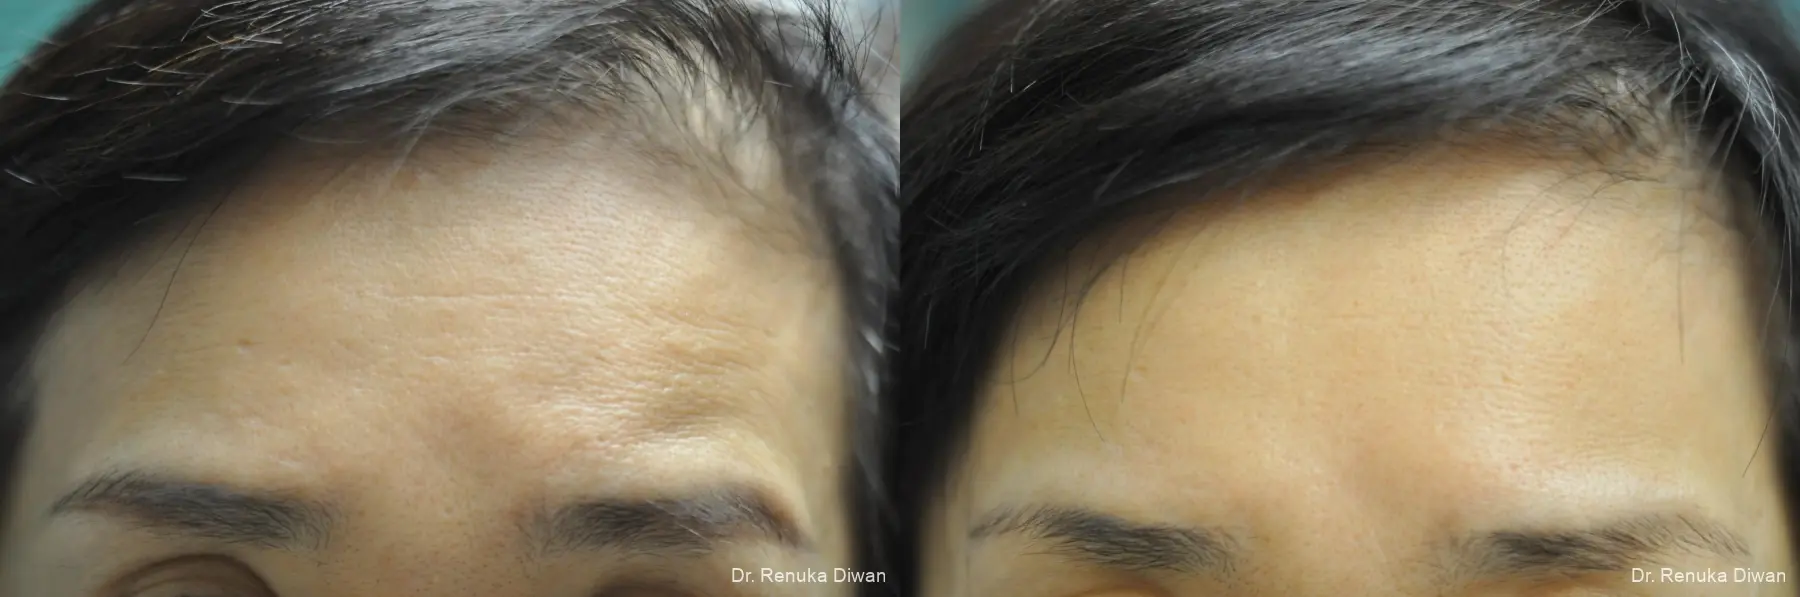 Forehead Creases: Patient 10 - Before and After  